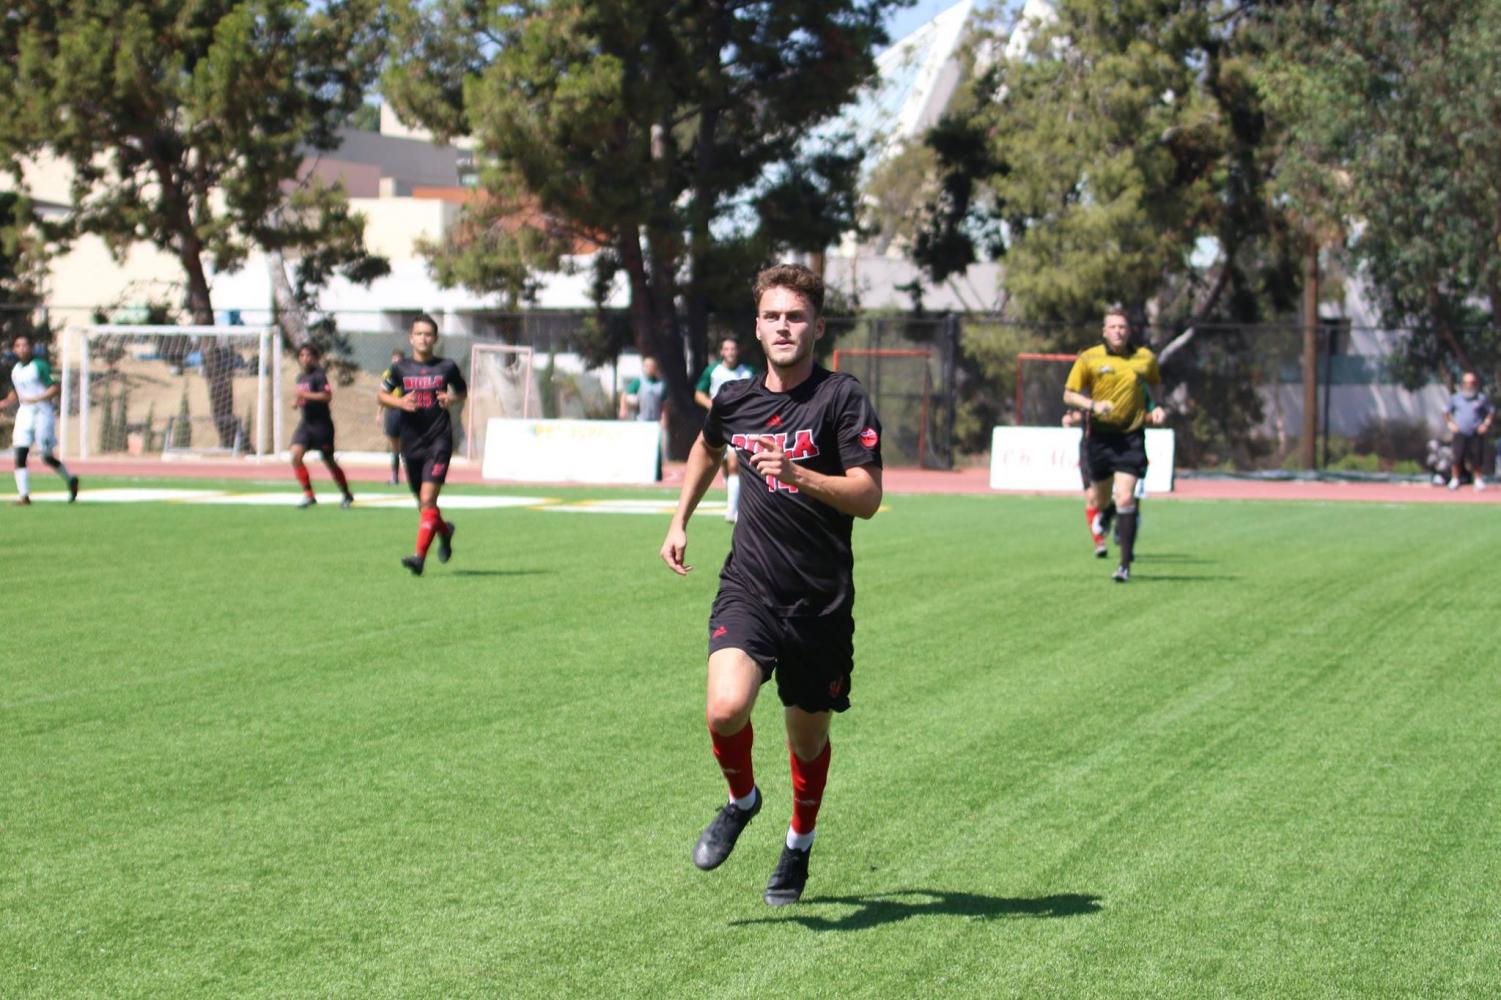 Sophomore forward Jack Cybulski, seen here in a file photo, gave the Eagles a 1-0 win over Hawaii Pacific on Oct. 11 with his goal in the 59th minute.